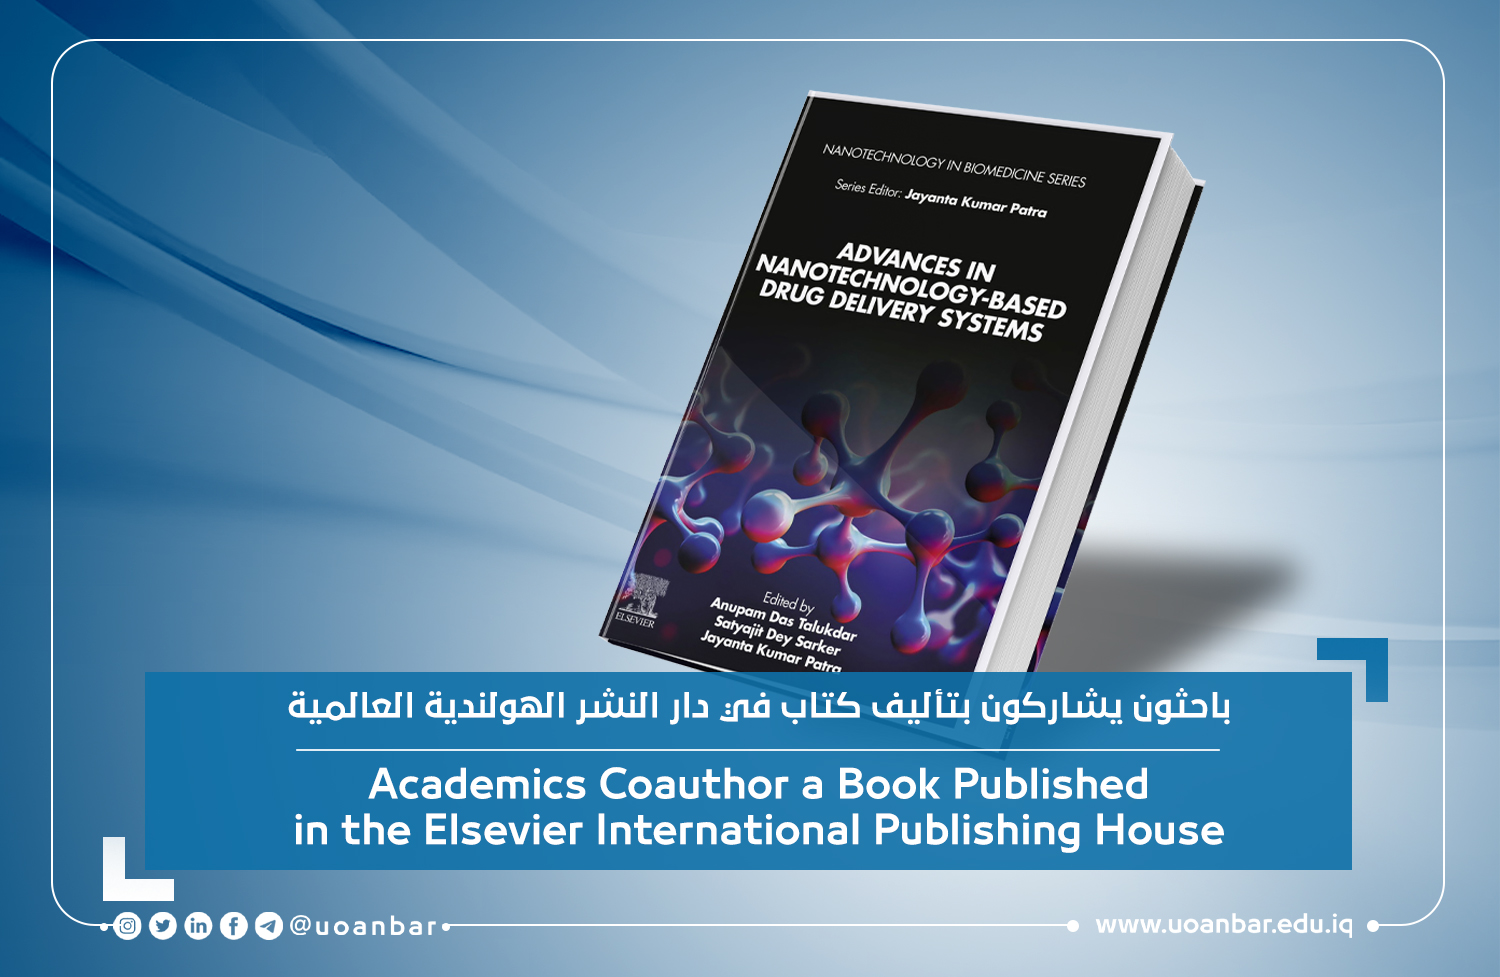 Academics Coauthor a Book Published in the Elsevier International Publishing House